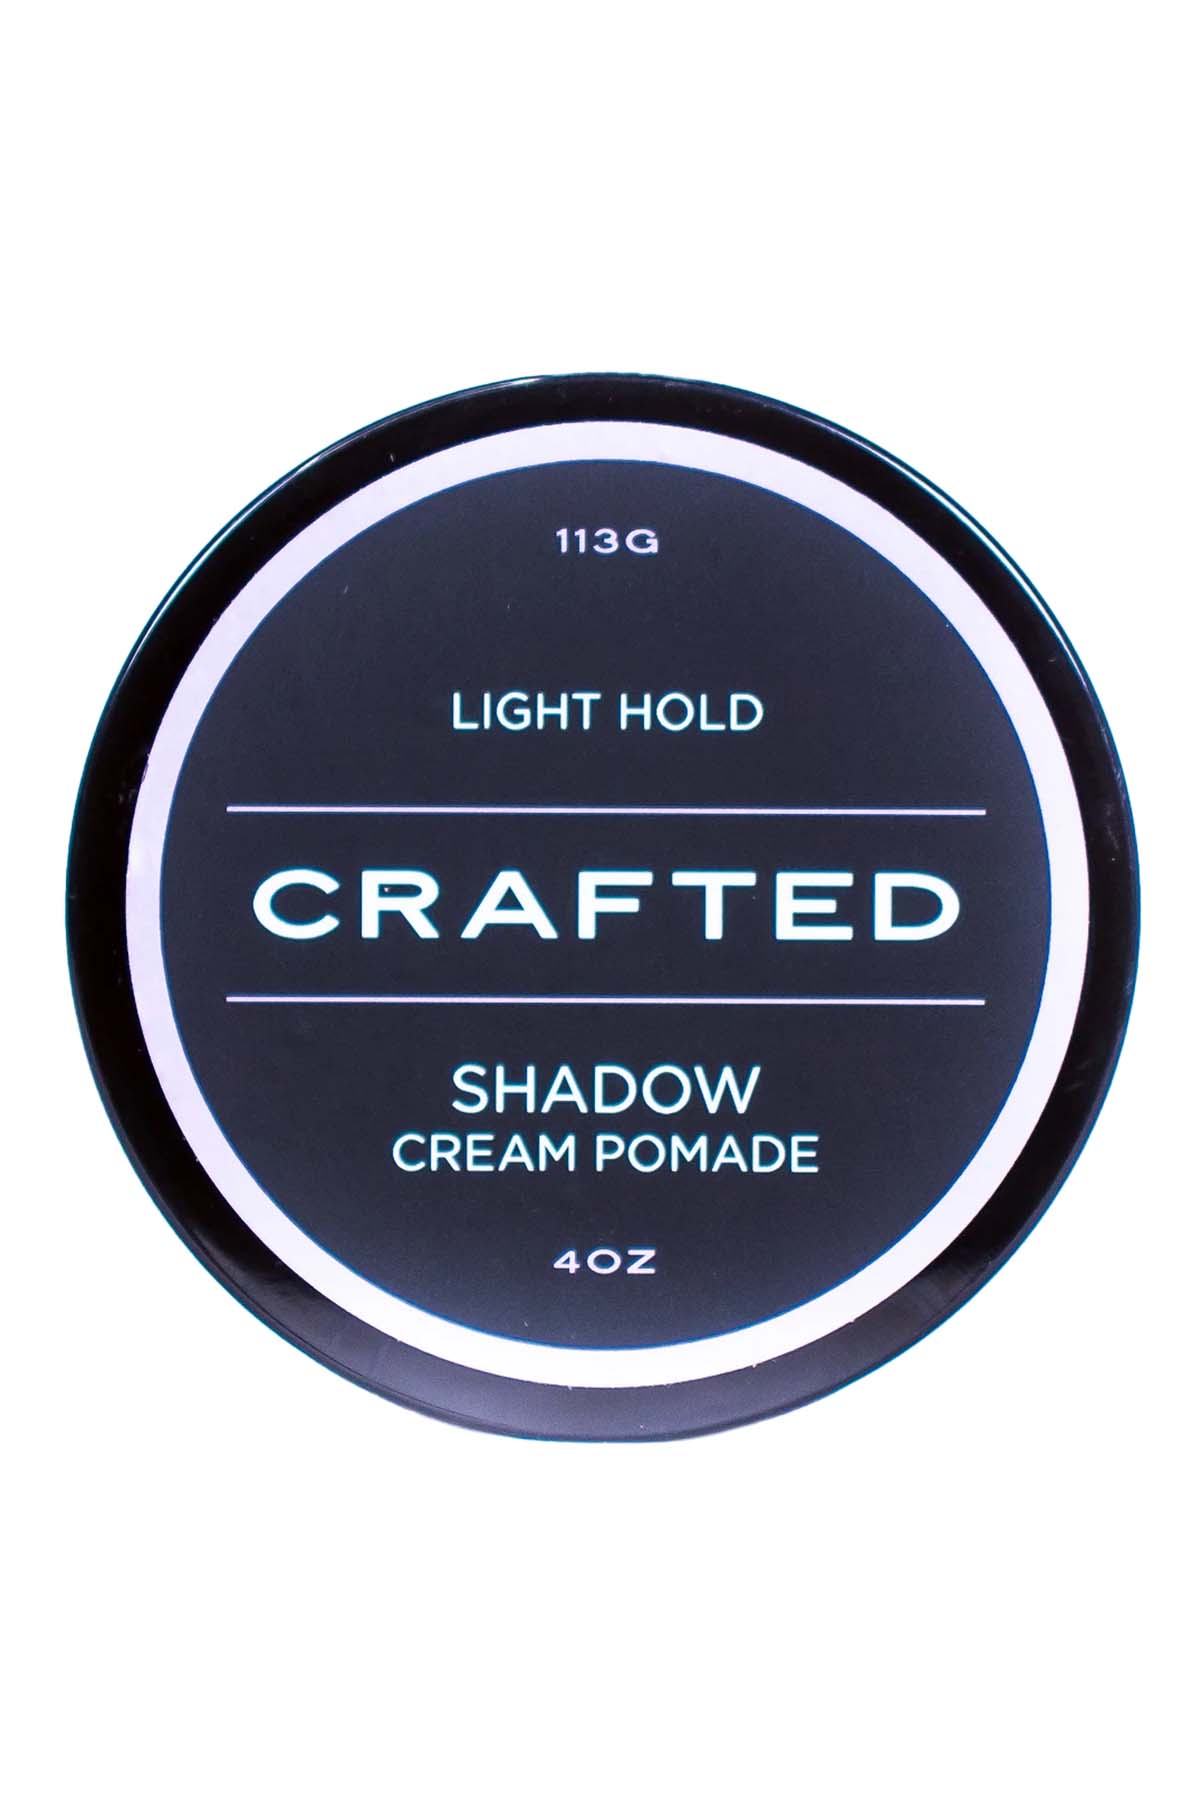 TheSalonGuy Crafted Shadow Cream Pomade